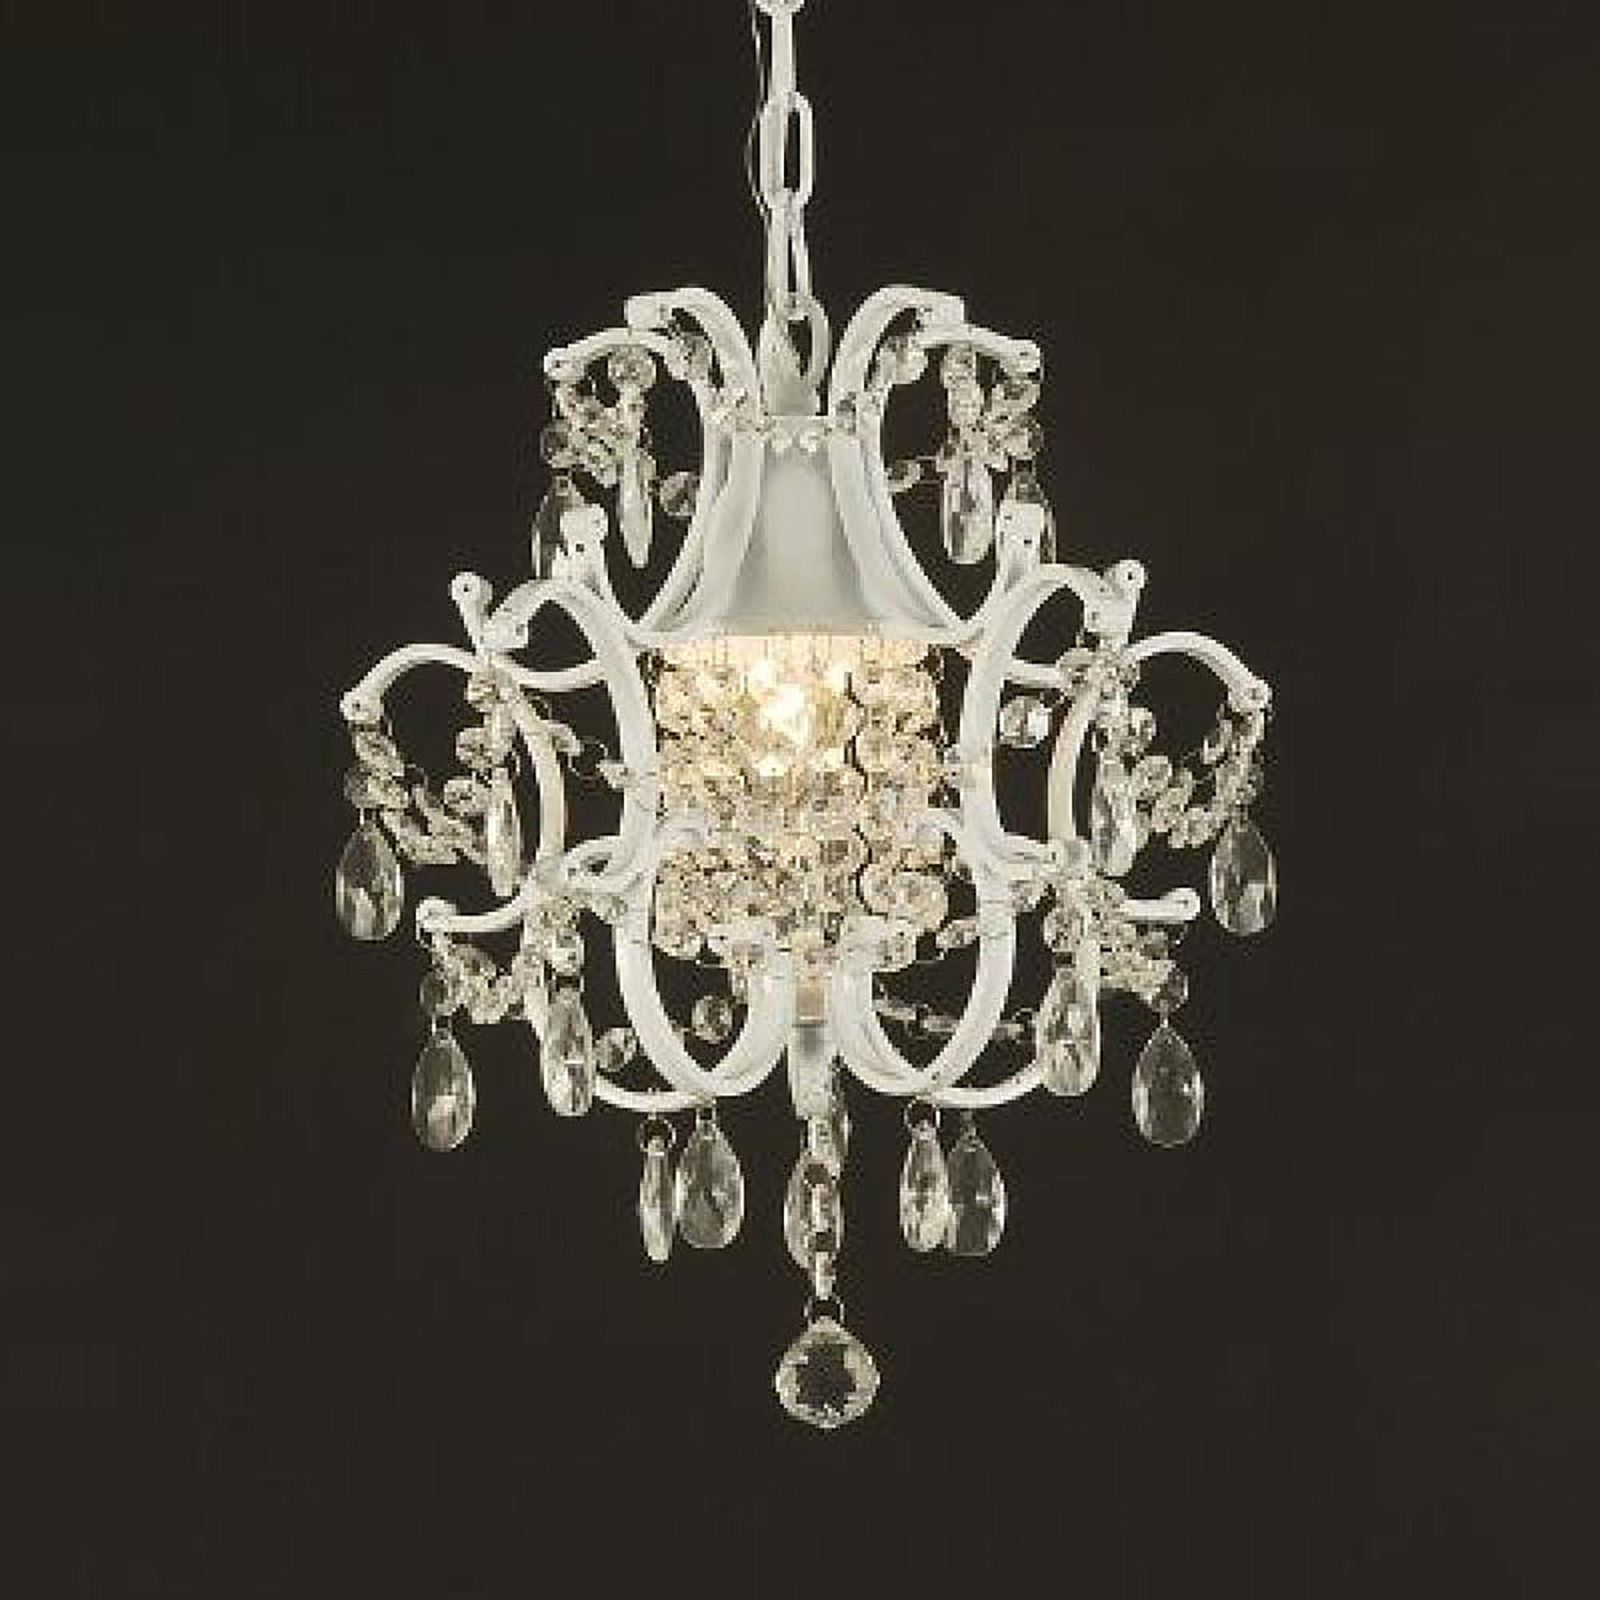 Chandelier crystal wrought iron lighting fixture white french antique